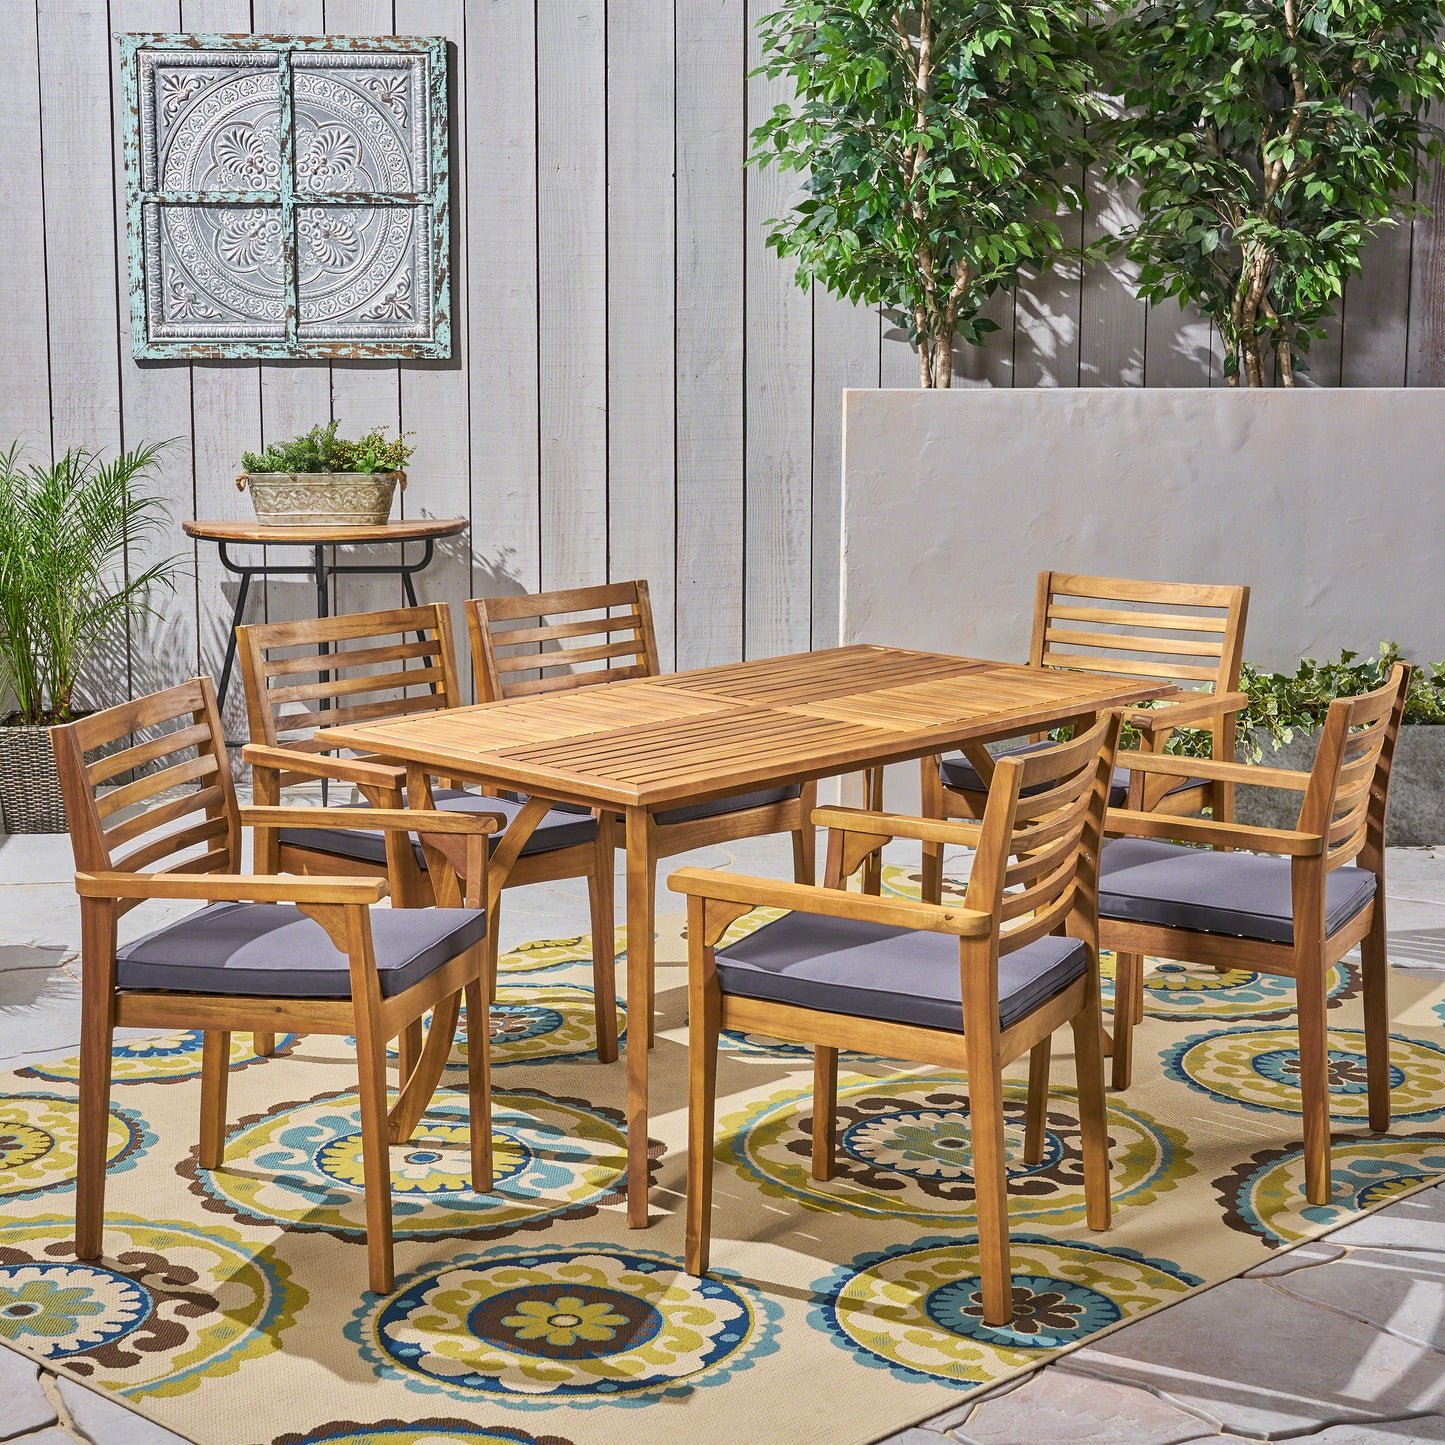 Phoenix Outdoor Acacia 6-Seater Dining Set with Cushions and 59" Rectangular Table with Carved Legs